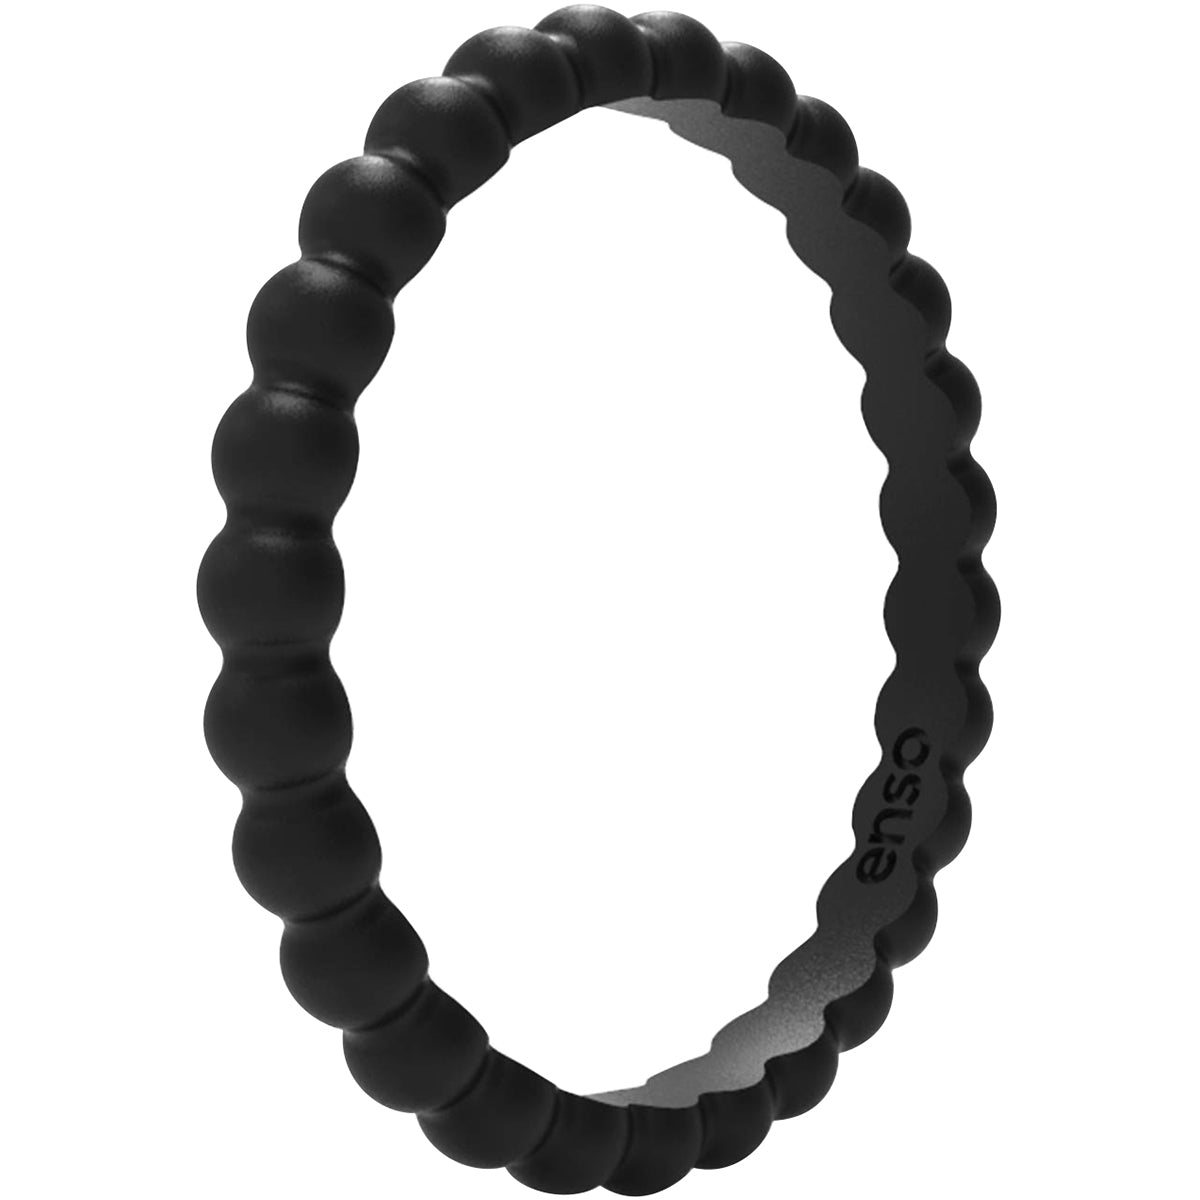 Enso Rings Beaded Stackables Series Silicone Ring - Obsidian Enso Rings